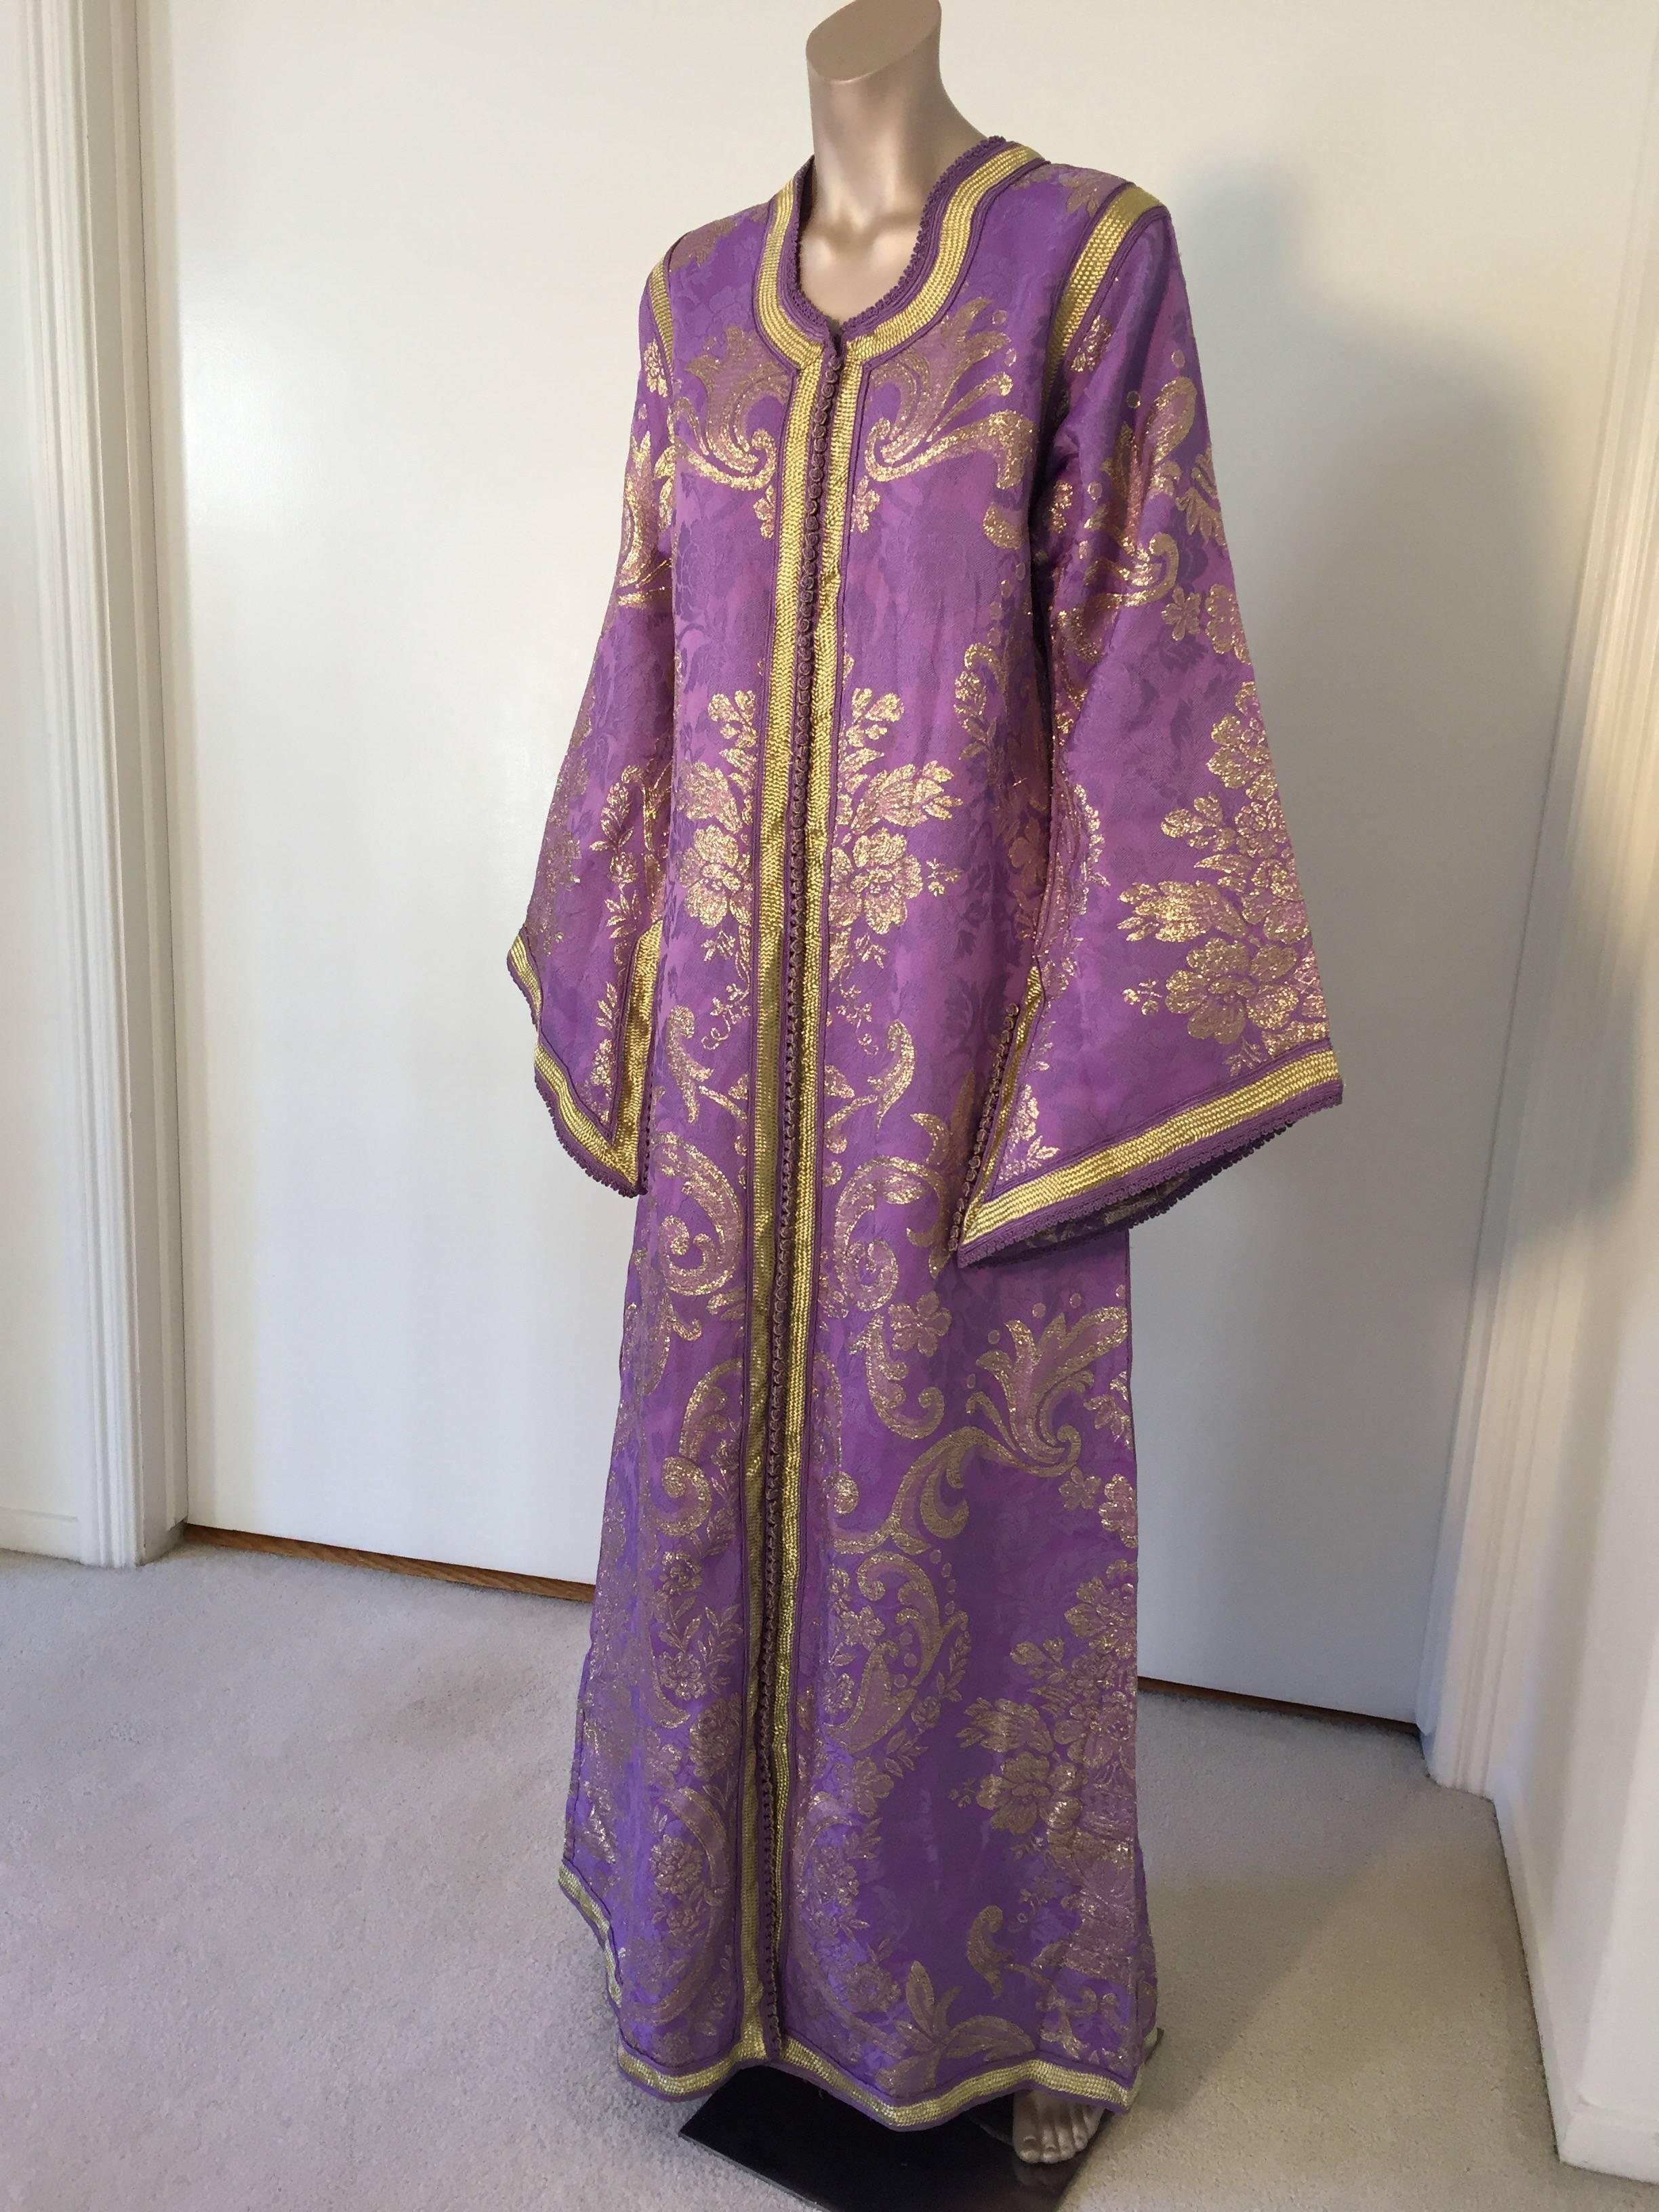 Evening or interior lavender and gold metallic floral brocade dress kaftan with gold trim.
Hand-made ceremonial caftan from North Africa, Morocco.
Vintage exotic 1970s metallic purple brocade caftan gown.
The luminous lavender and gold metallic